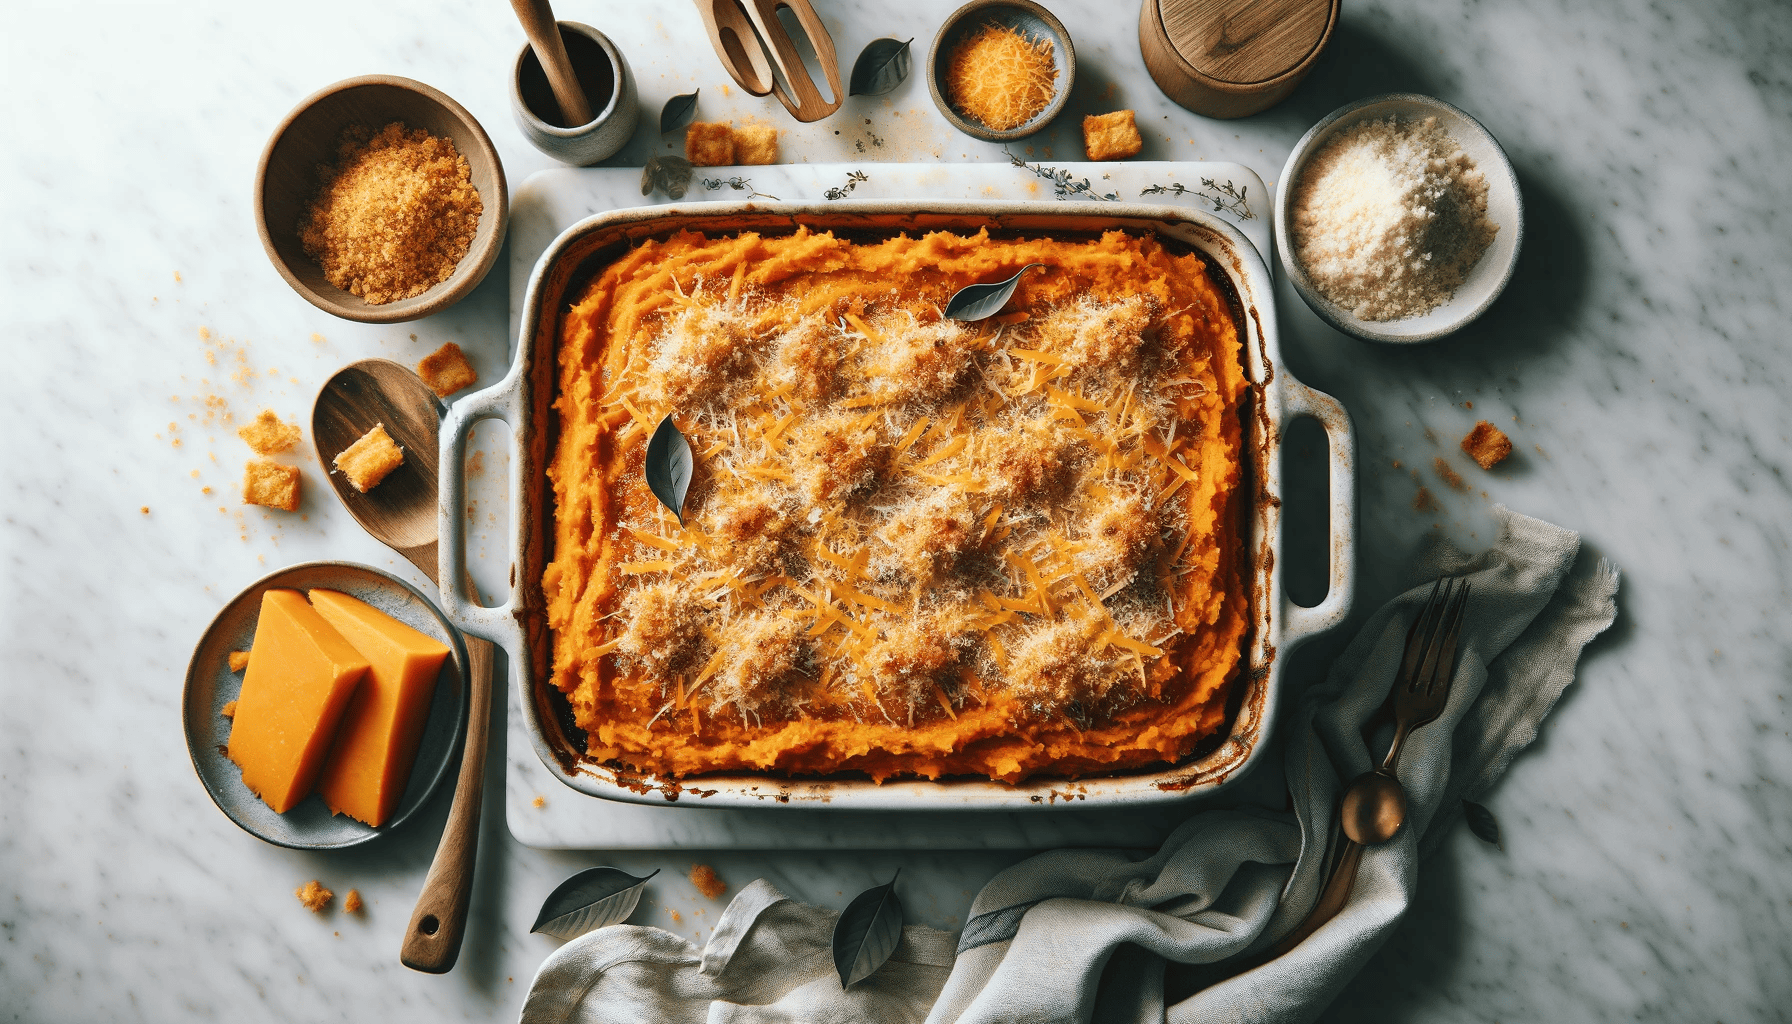 A golden-brown sweet potato casserole in a baking dish on a marble countertop, ready to be served